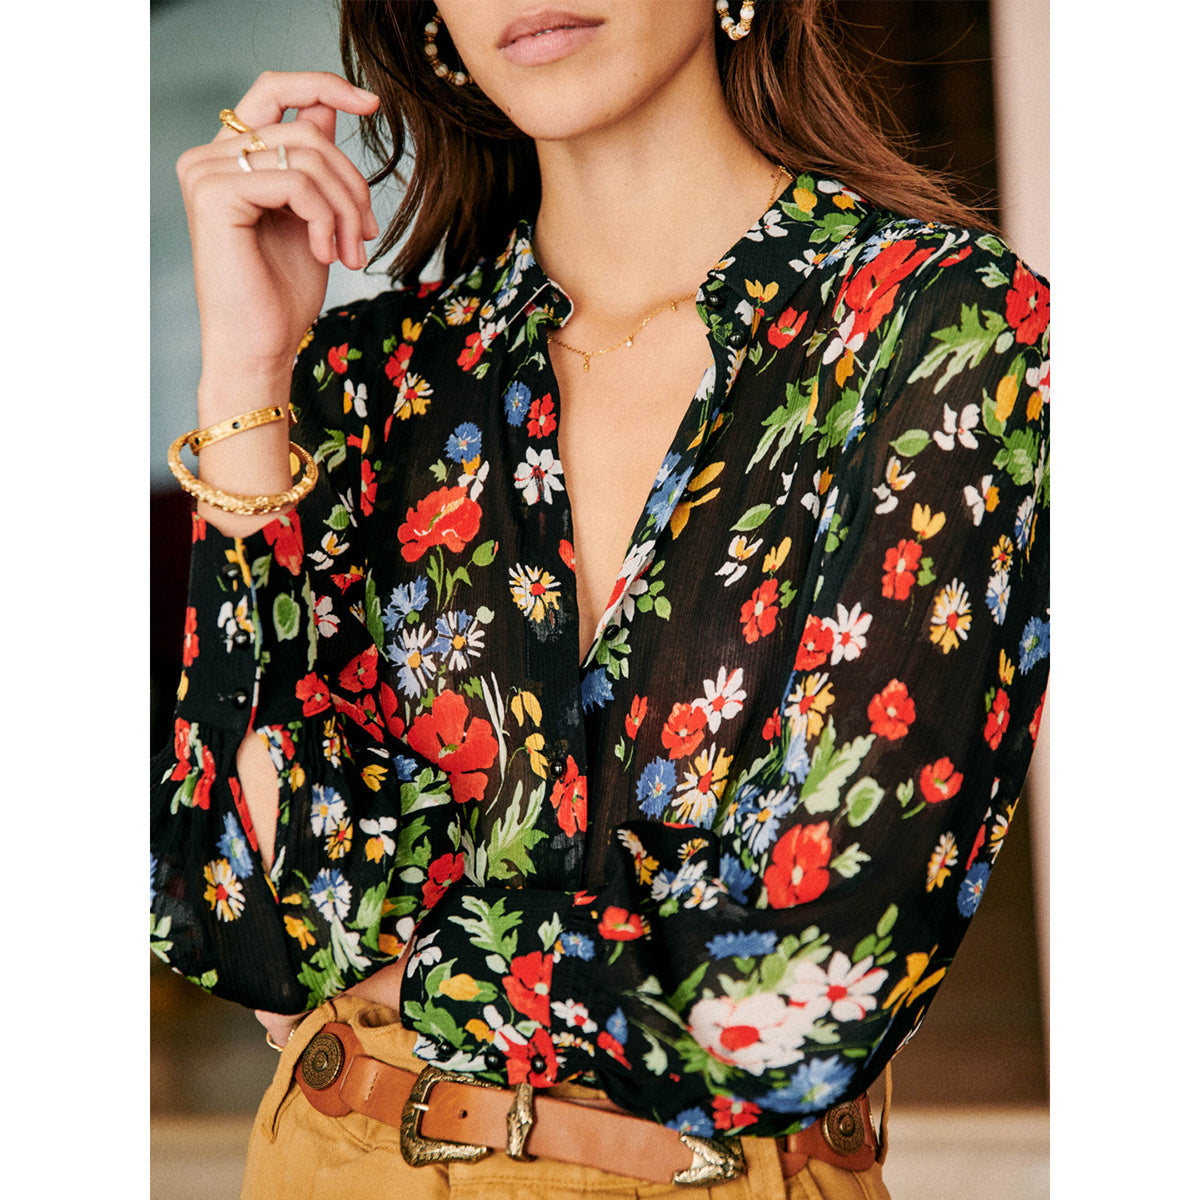 Blooming by the shore: This colorful floral beach shirt lets your elegance blossom.